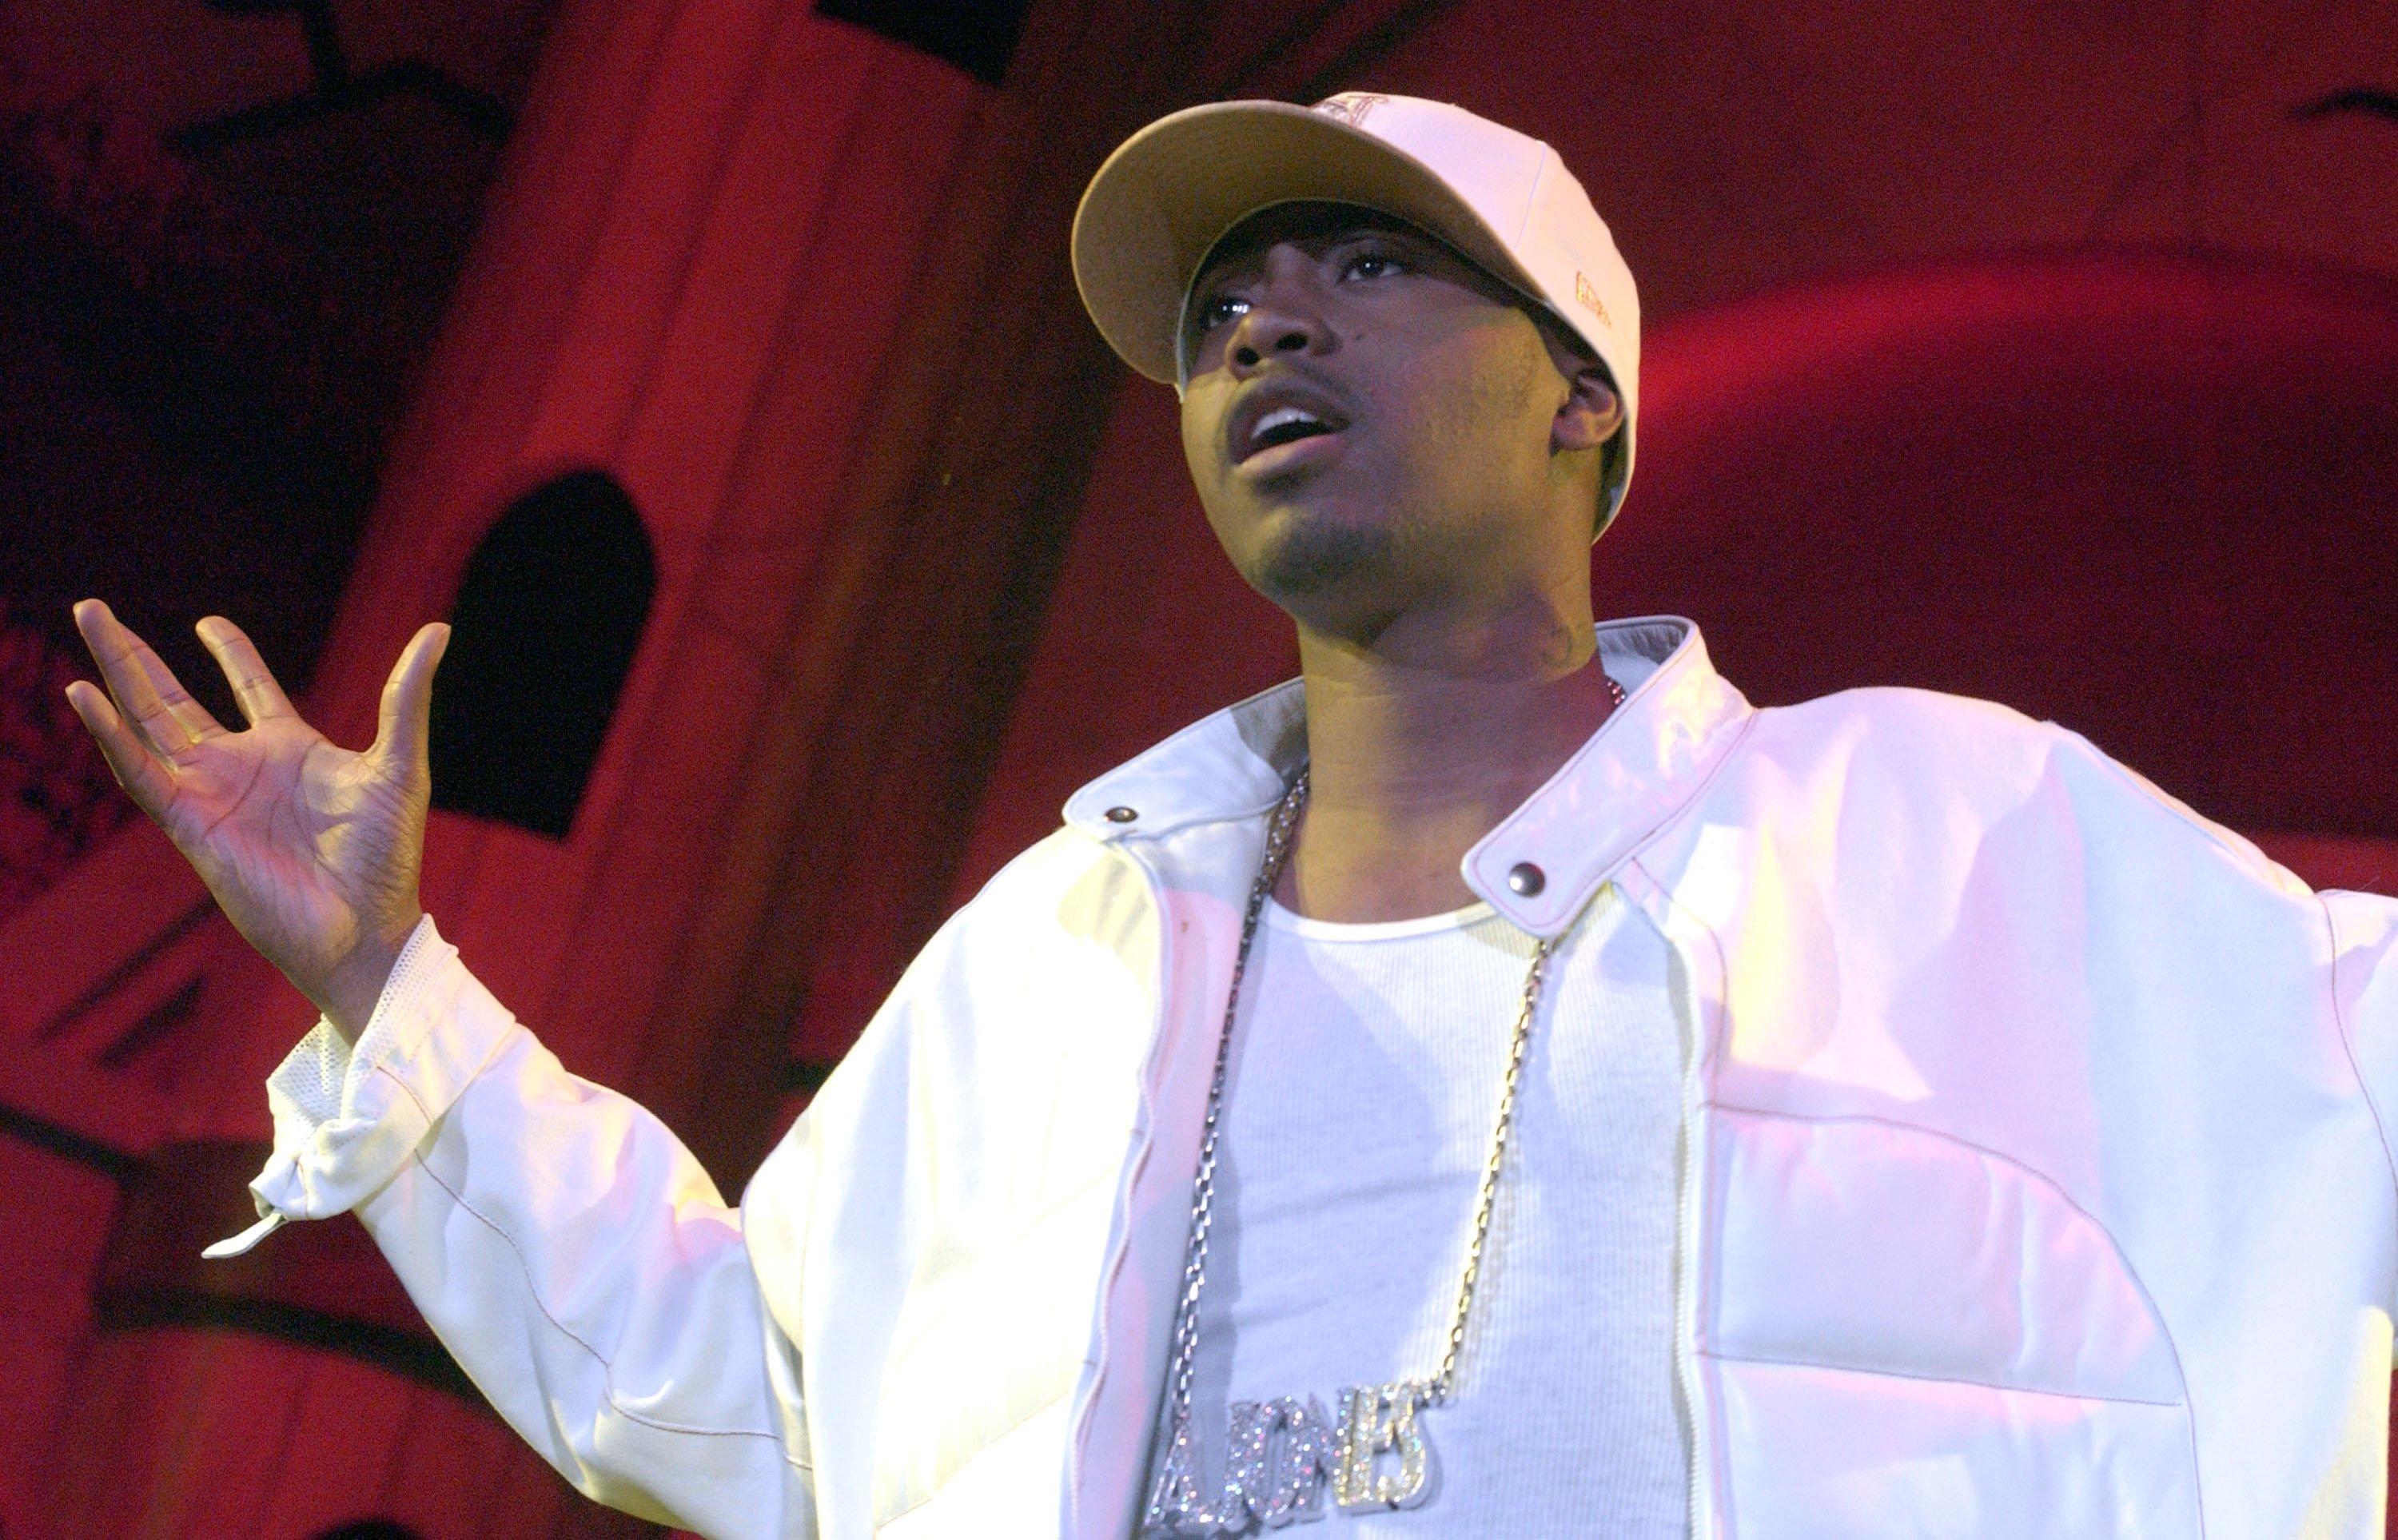 Rapper Nas joins the line-up for Radio 1's Hackney Weekend